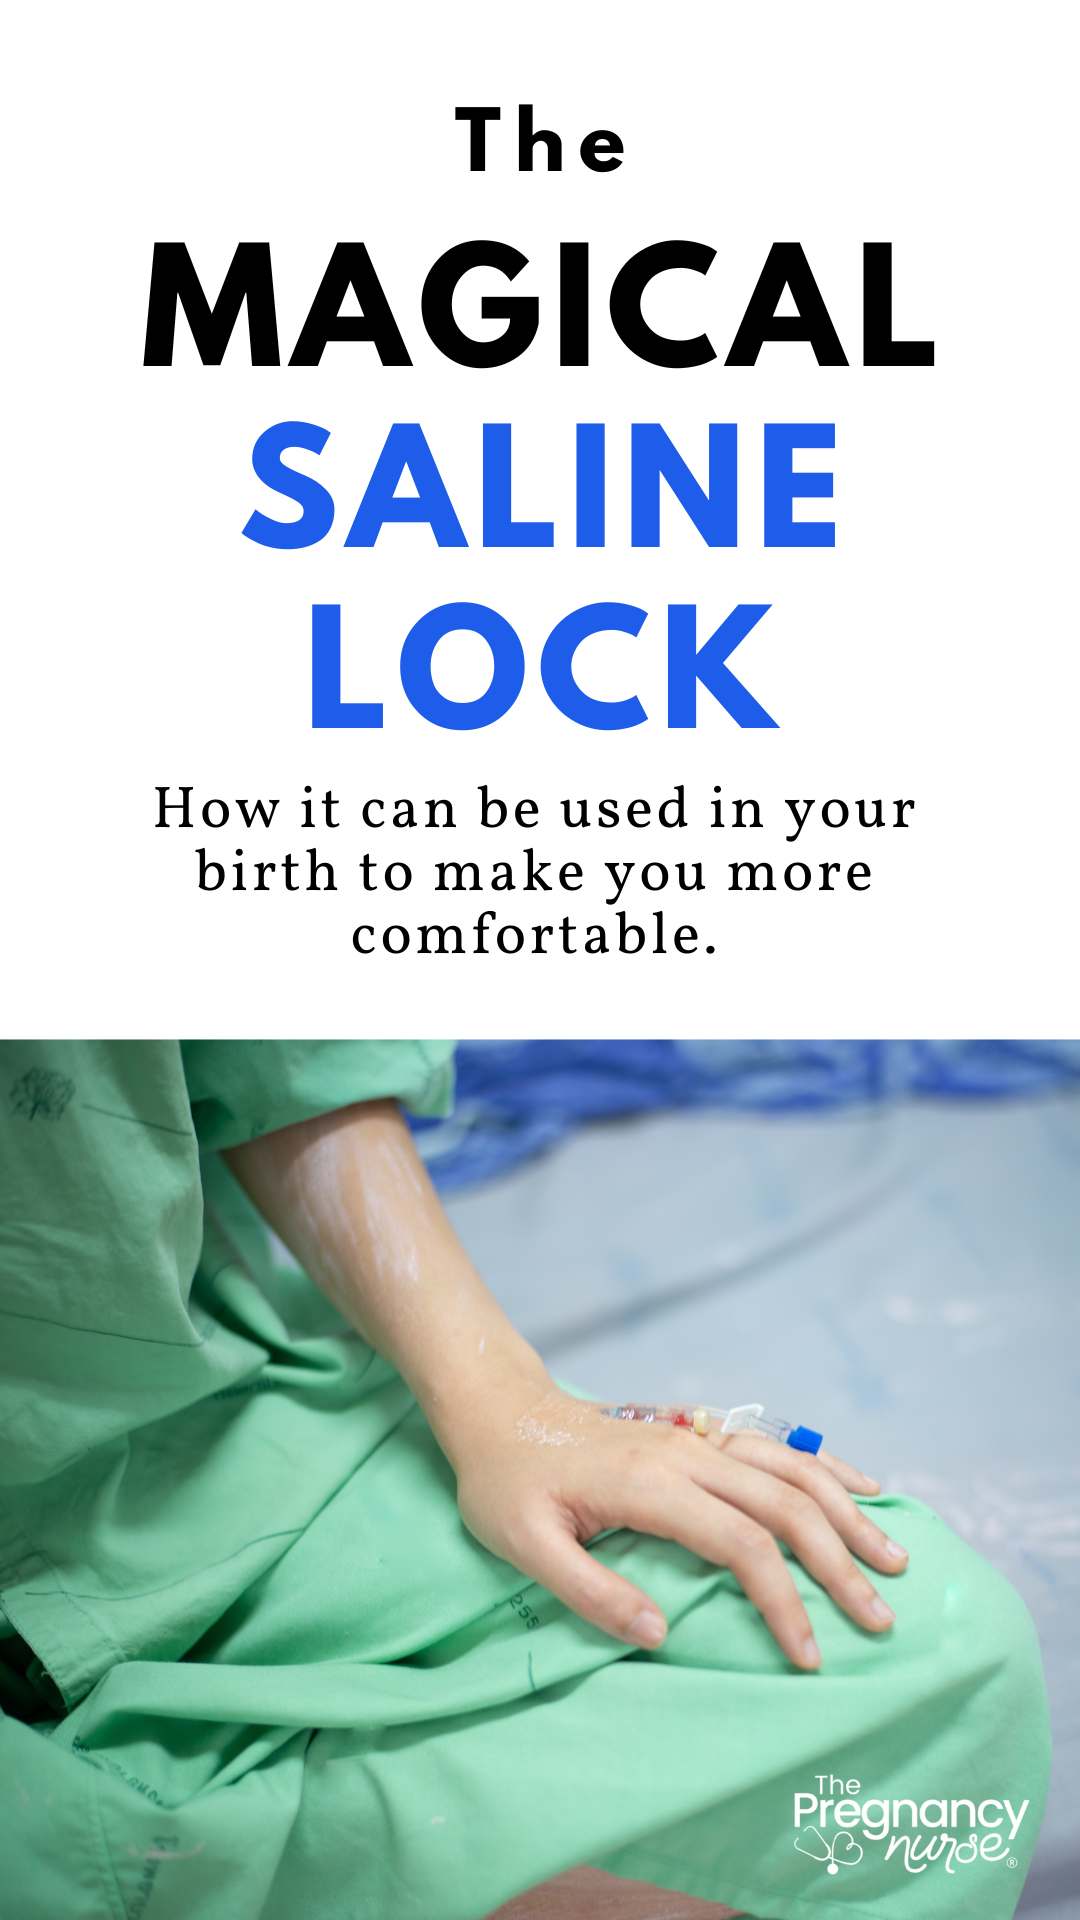 Are you a soon-to-be mom looking for more autonomy during your labor? This informative pin is all about the saline lock. It's meant for lower risk births, and leaves just a port for quick medication access without a constant tube in your arm. Learn who can use it, its pros and cons, where it goes, and how to find out if it's right for you.